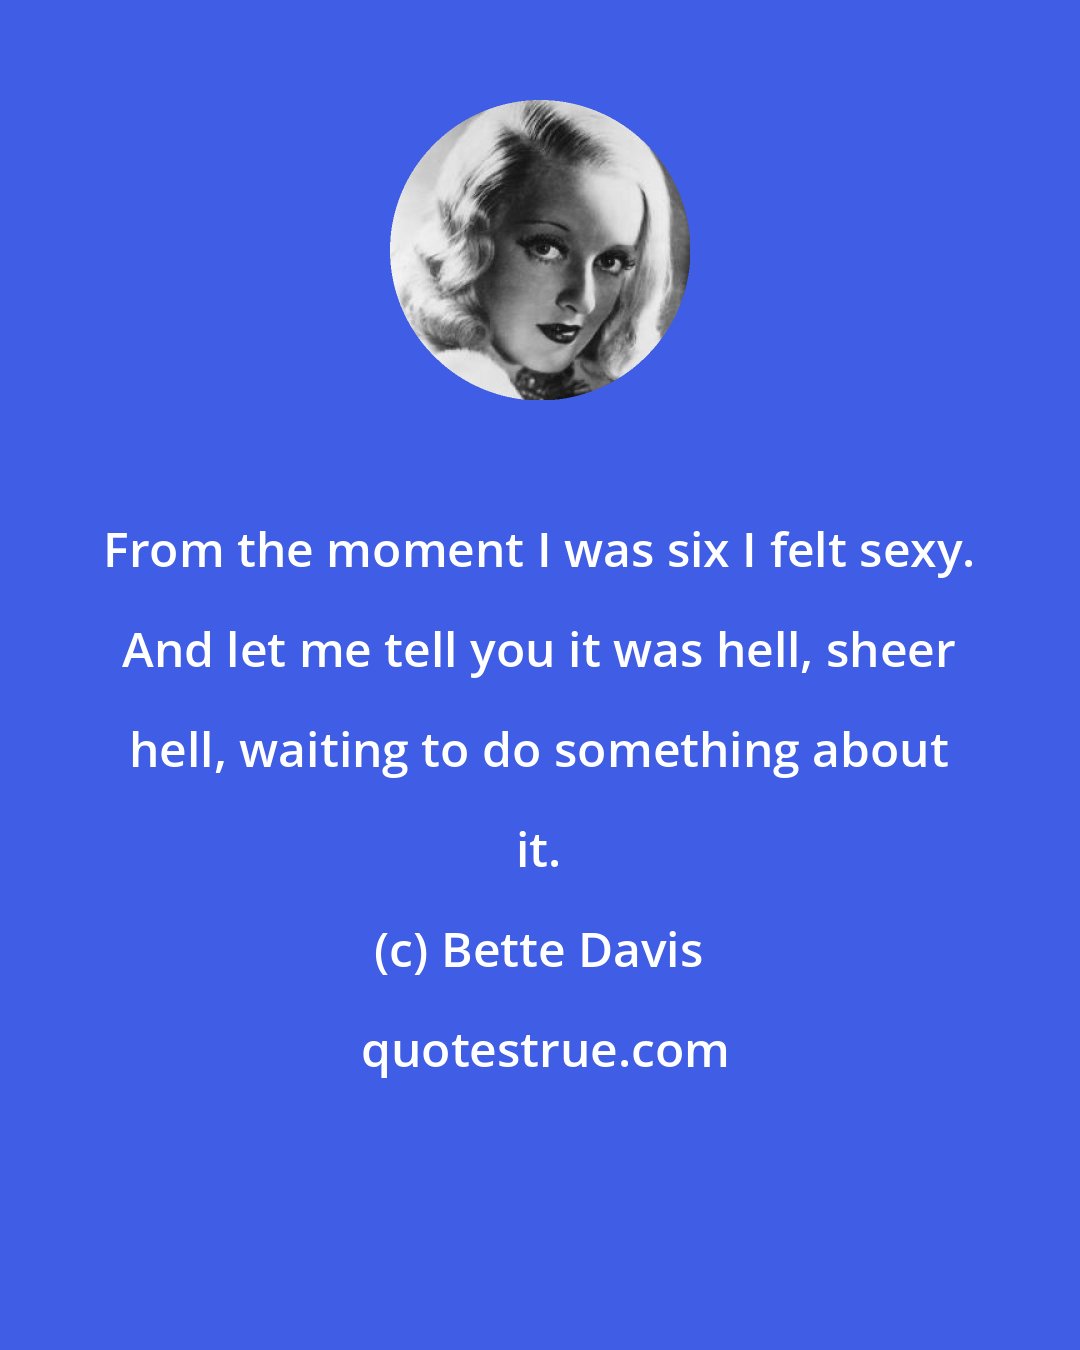 Bette Davis: From the moment I was six I felt sexy. And let me tell you it was hell, sheer hell, waiting to do something about it.